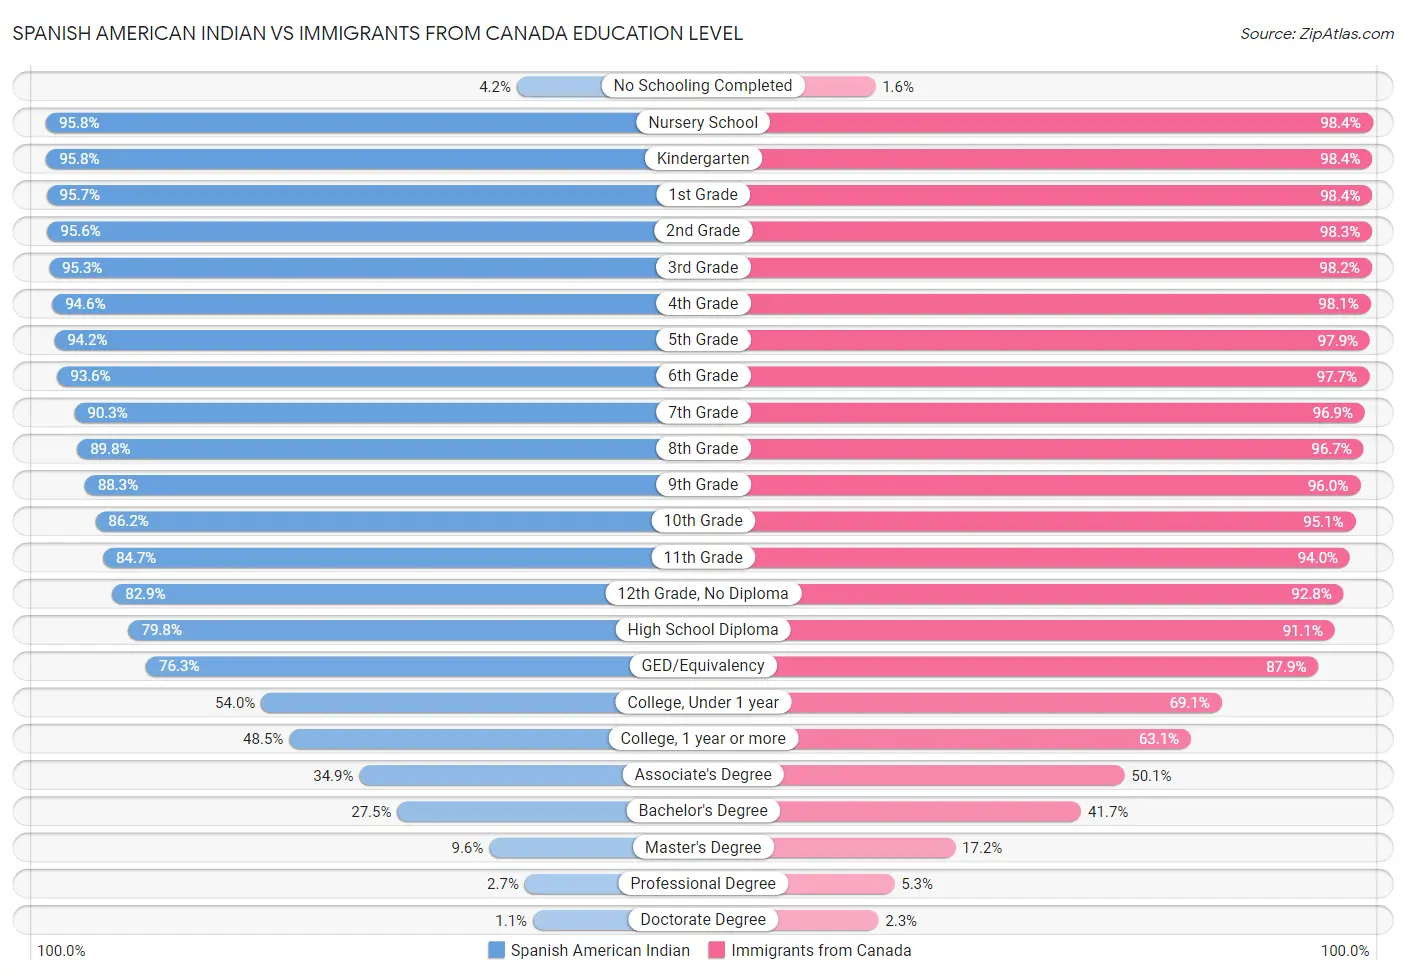 Spanish American Indian vs Immigrants from Canada Education Level